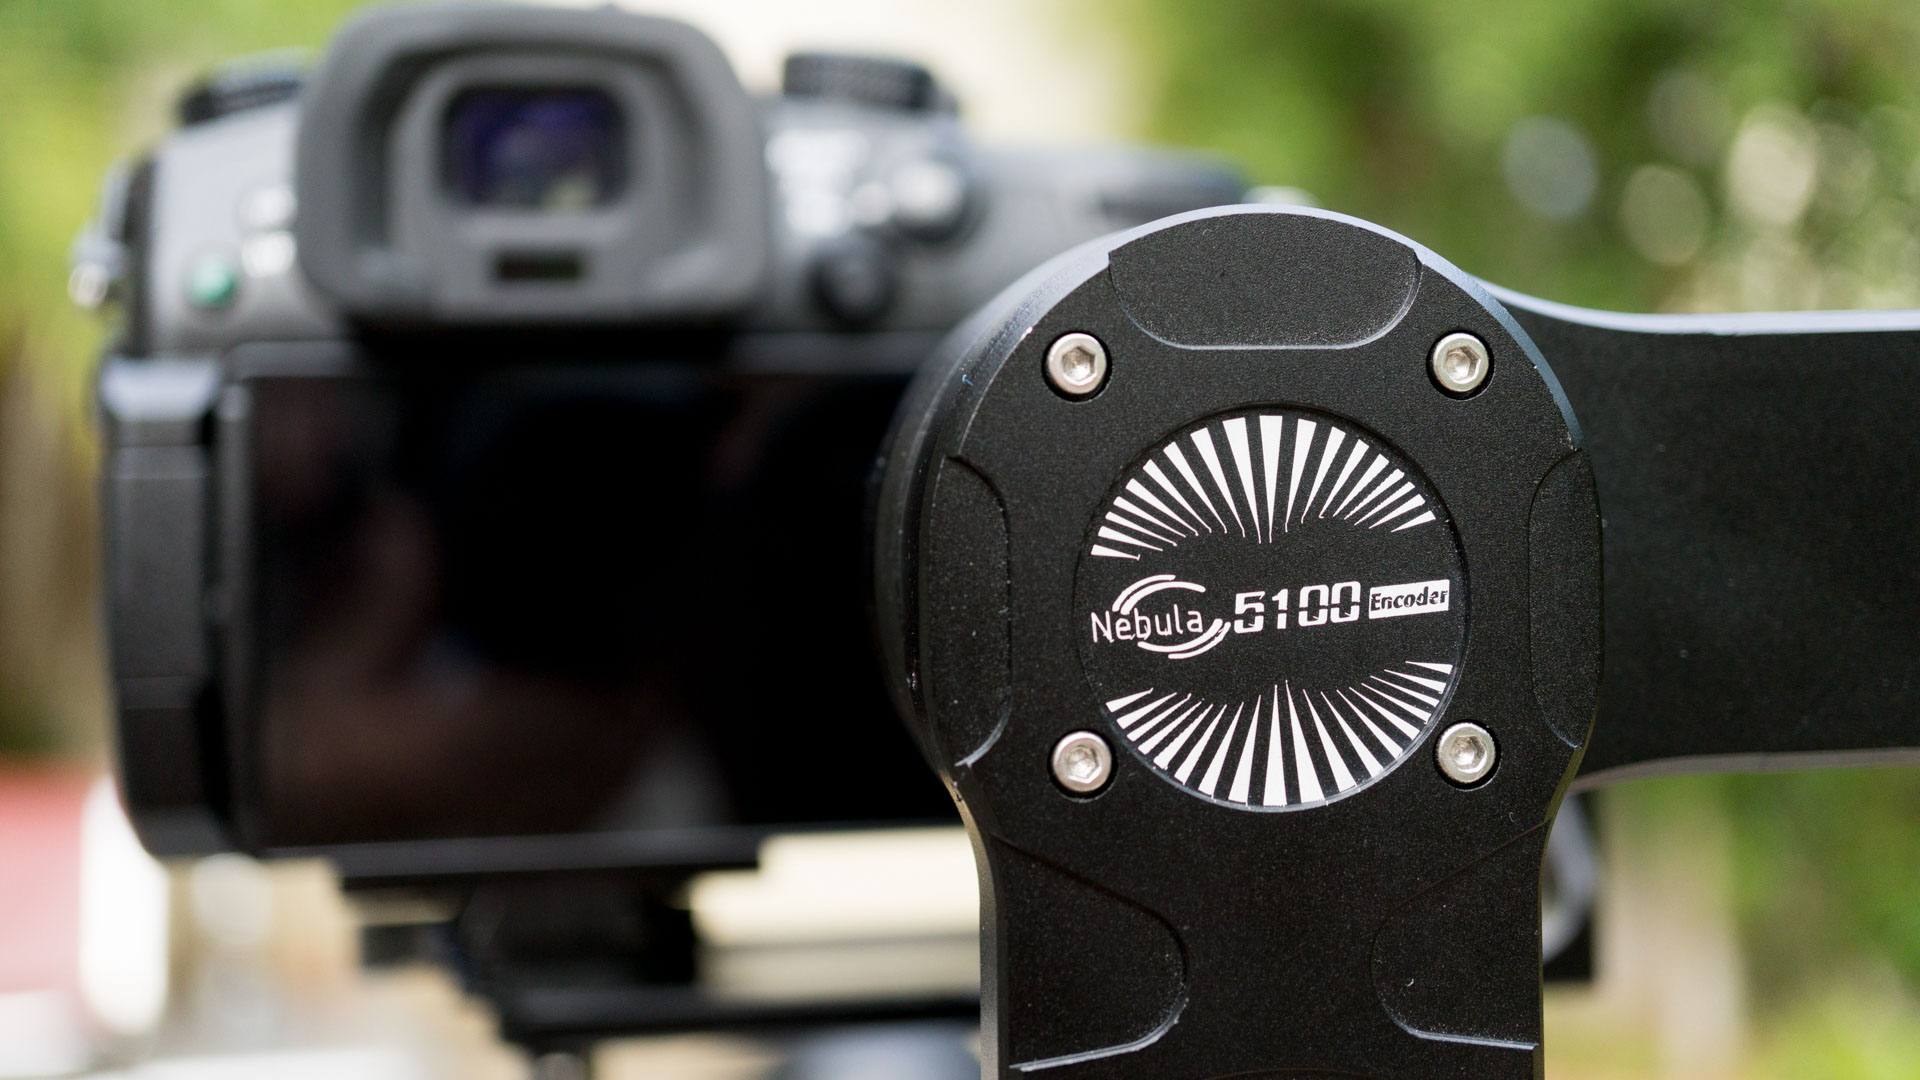 Filmpower Nebula 5100 hands on review - Newsshooter